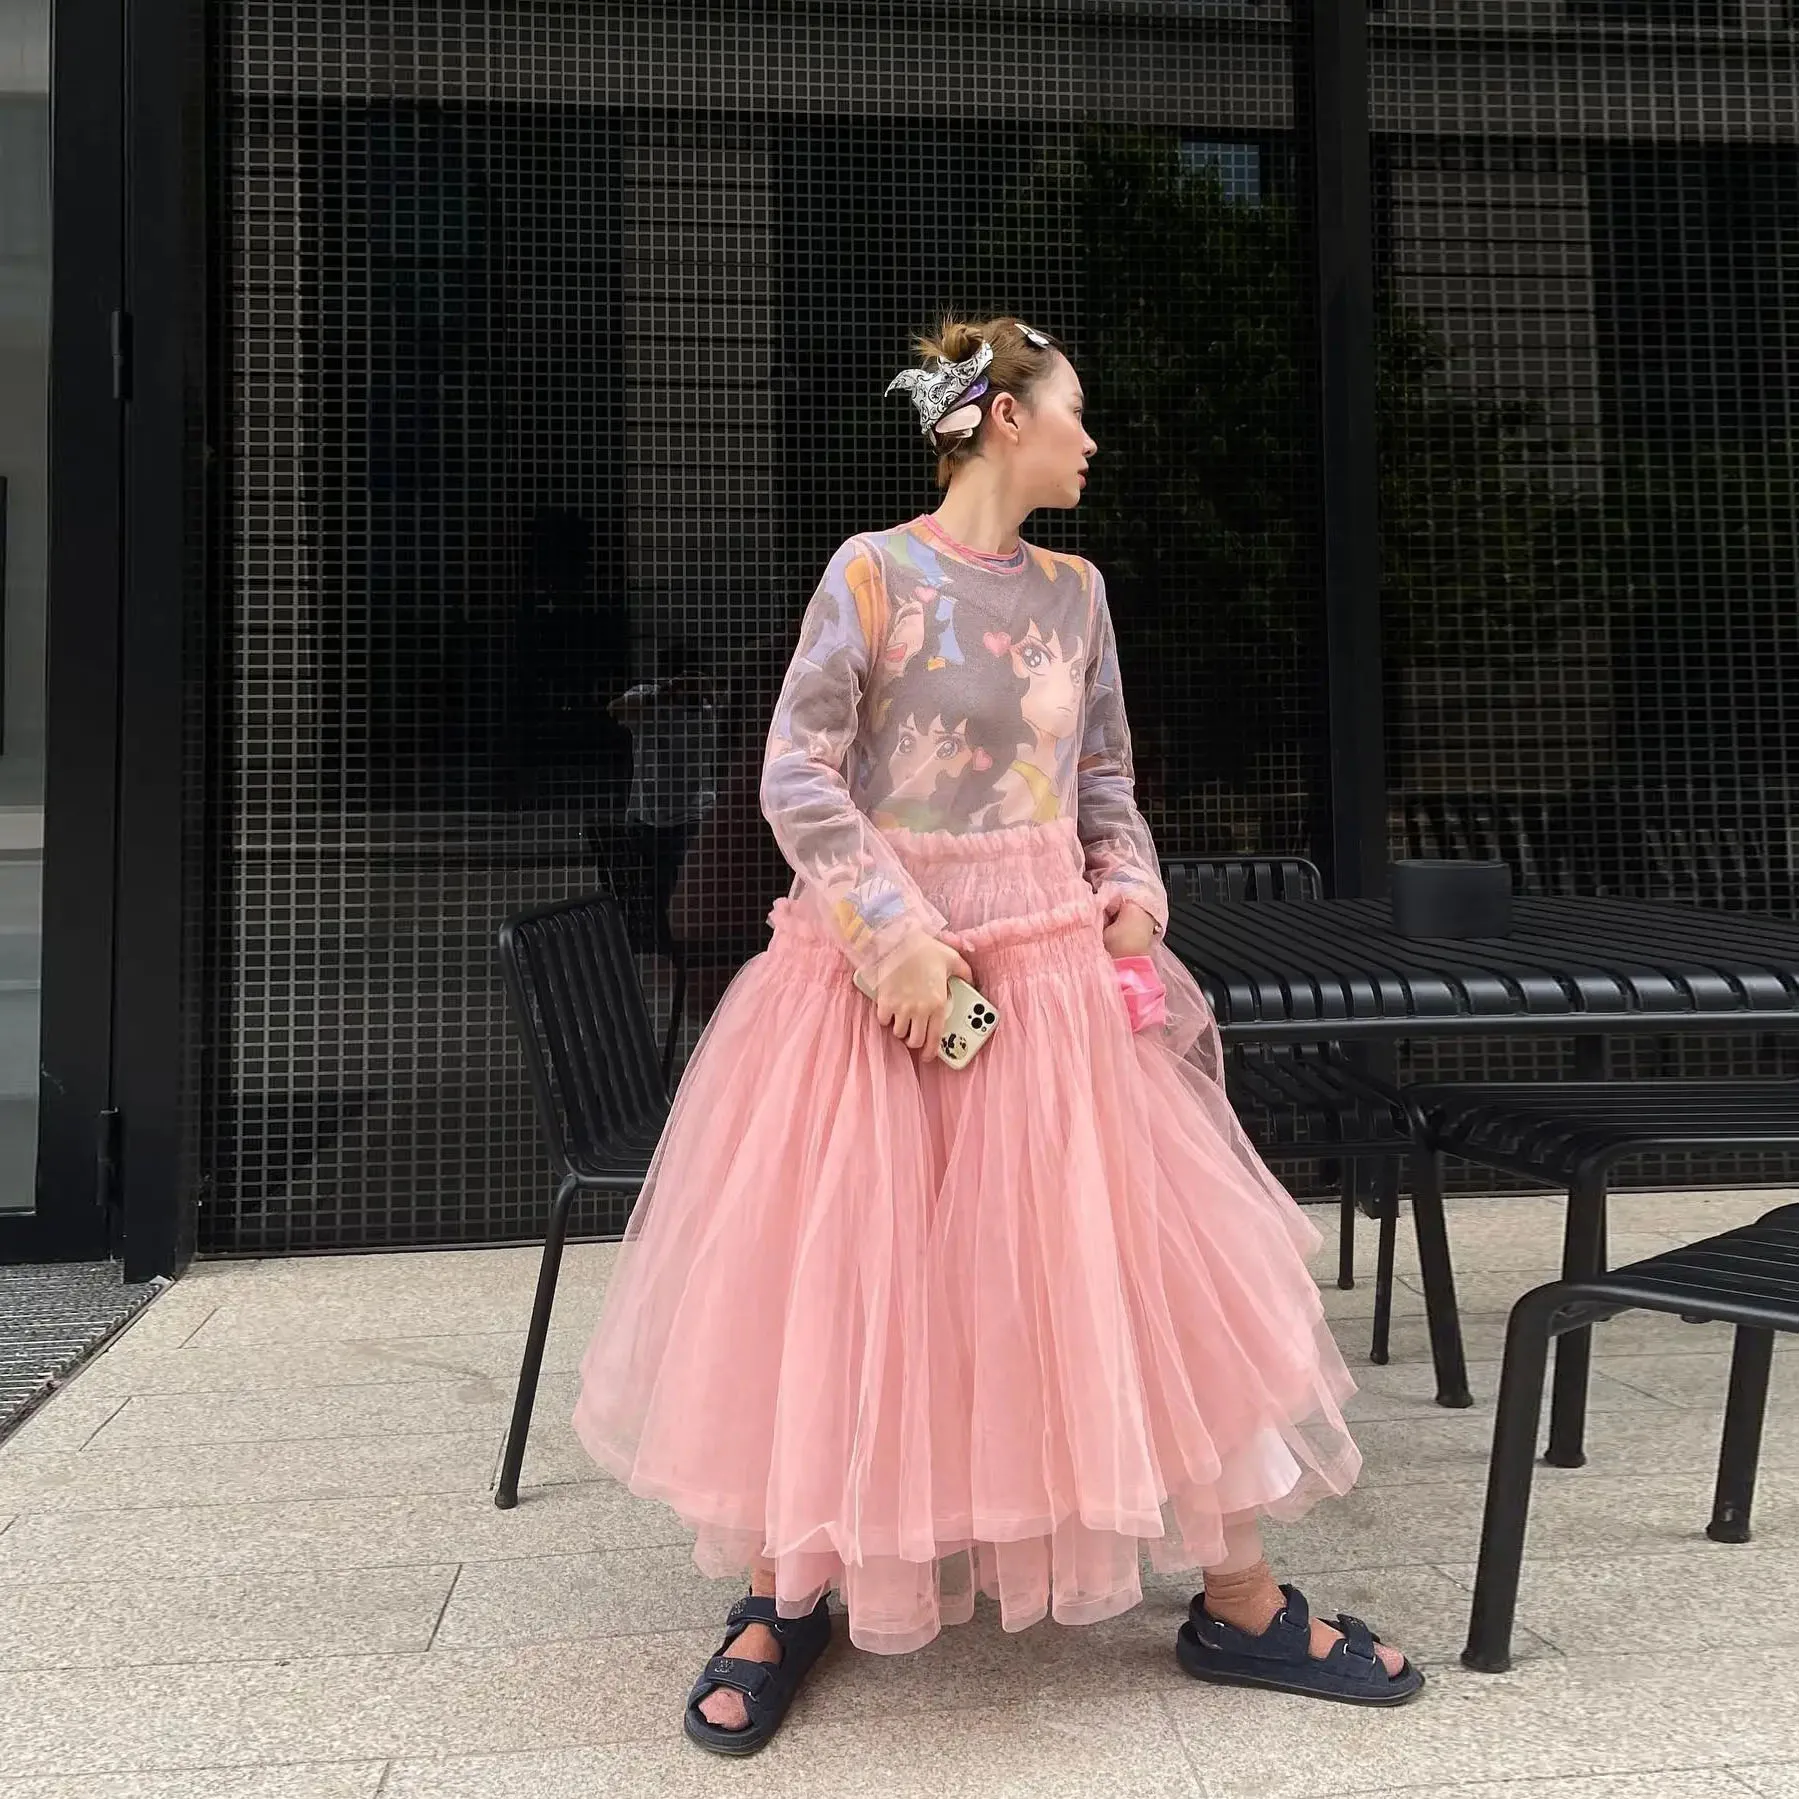 

Pink Transparent Dress Woman Illusion robe de soiree Sheer Prom Gowns Layered Ankle Length Fashion Dresses Tulle Sleeve Chic